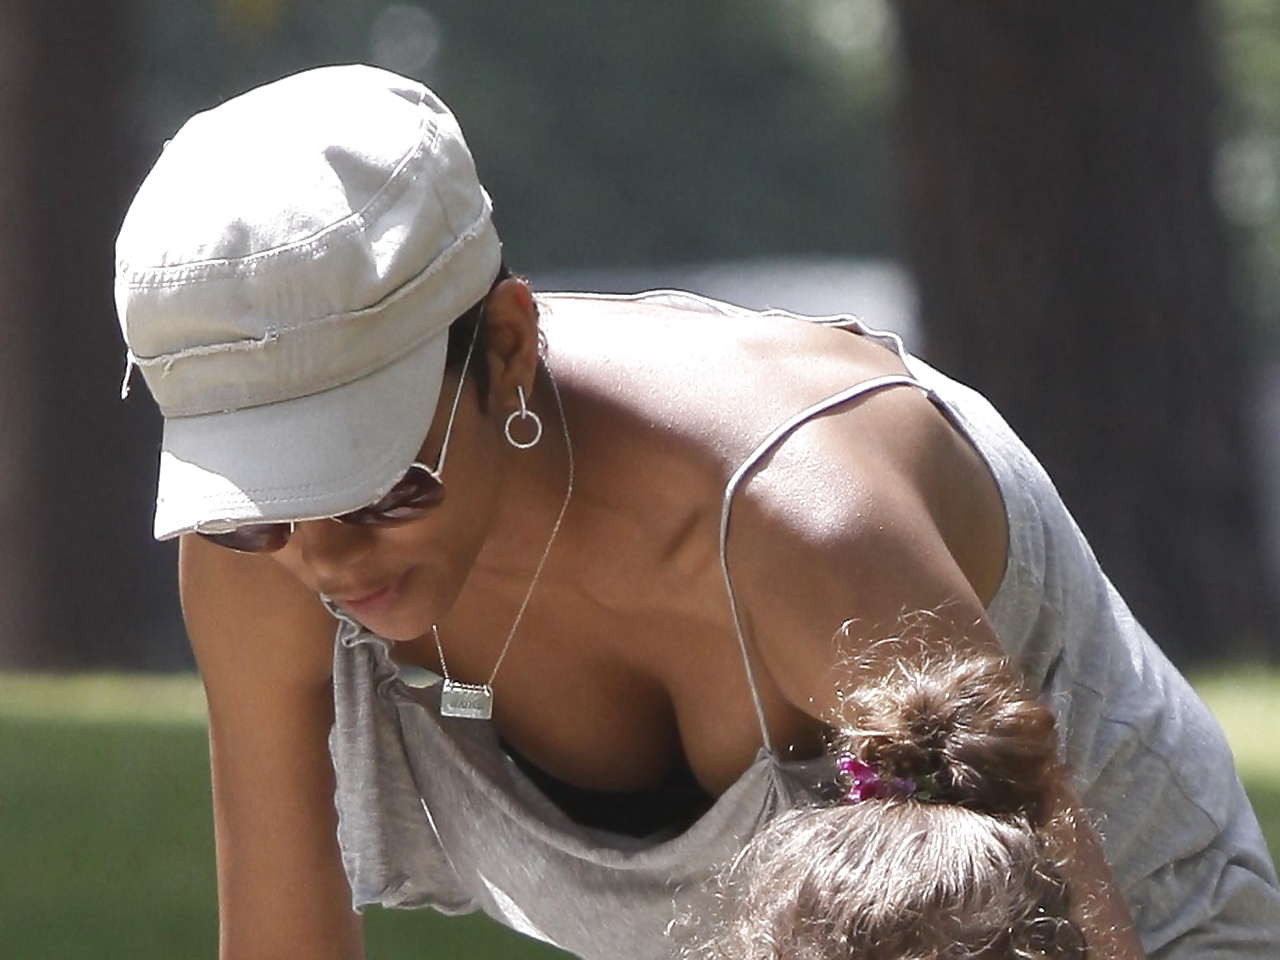 Halle Berry downblouse and showing her pussy and nice tits paparazzi pictures #75295621